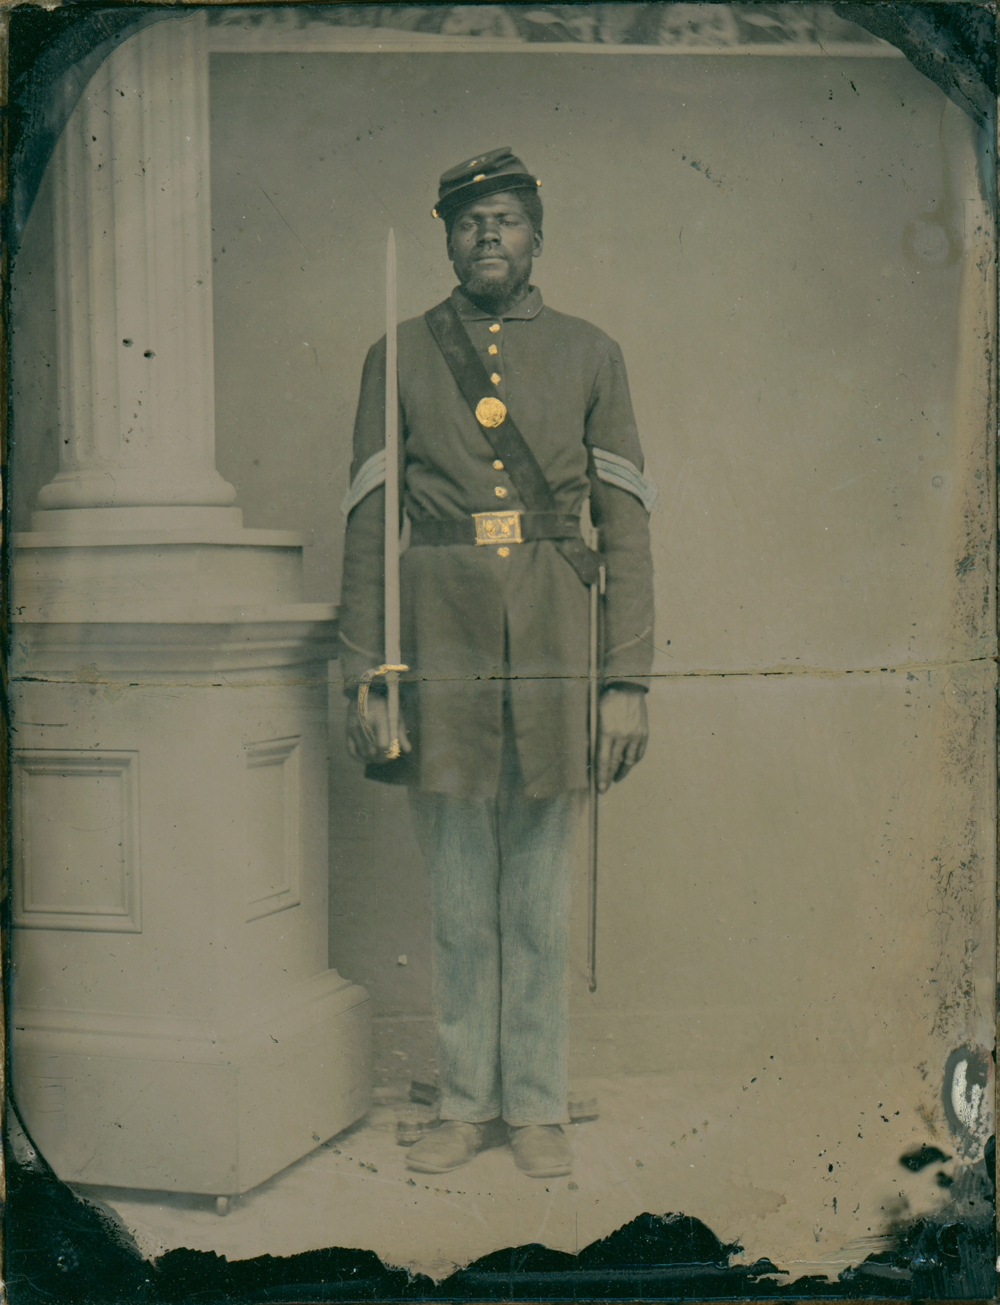 Sergeant Henry F. Steward (c. 1840–1863) was a Michigan farmer who made his way to Boston and enlisted in the 54th Massachusetts, for which he also recruited additional volunteers. He was wounded during the assault on Fort Wagner on July 18, 1863, and died of dysentery in September at the camp hospital on Morris Island, South Carolina.